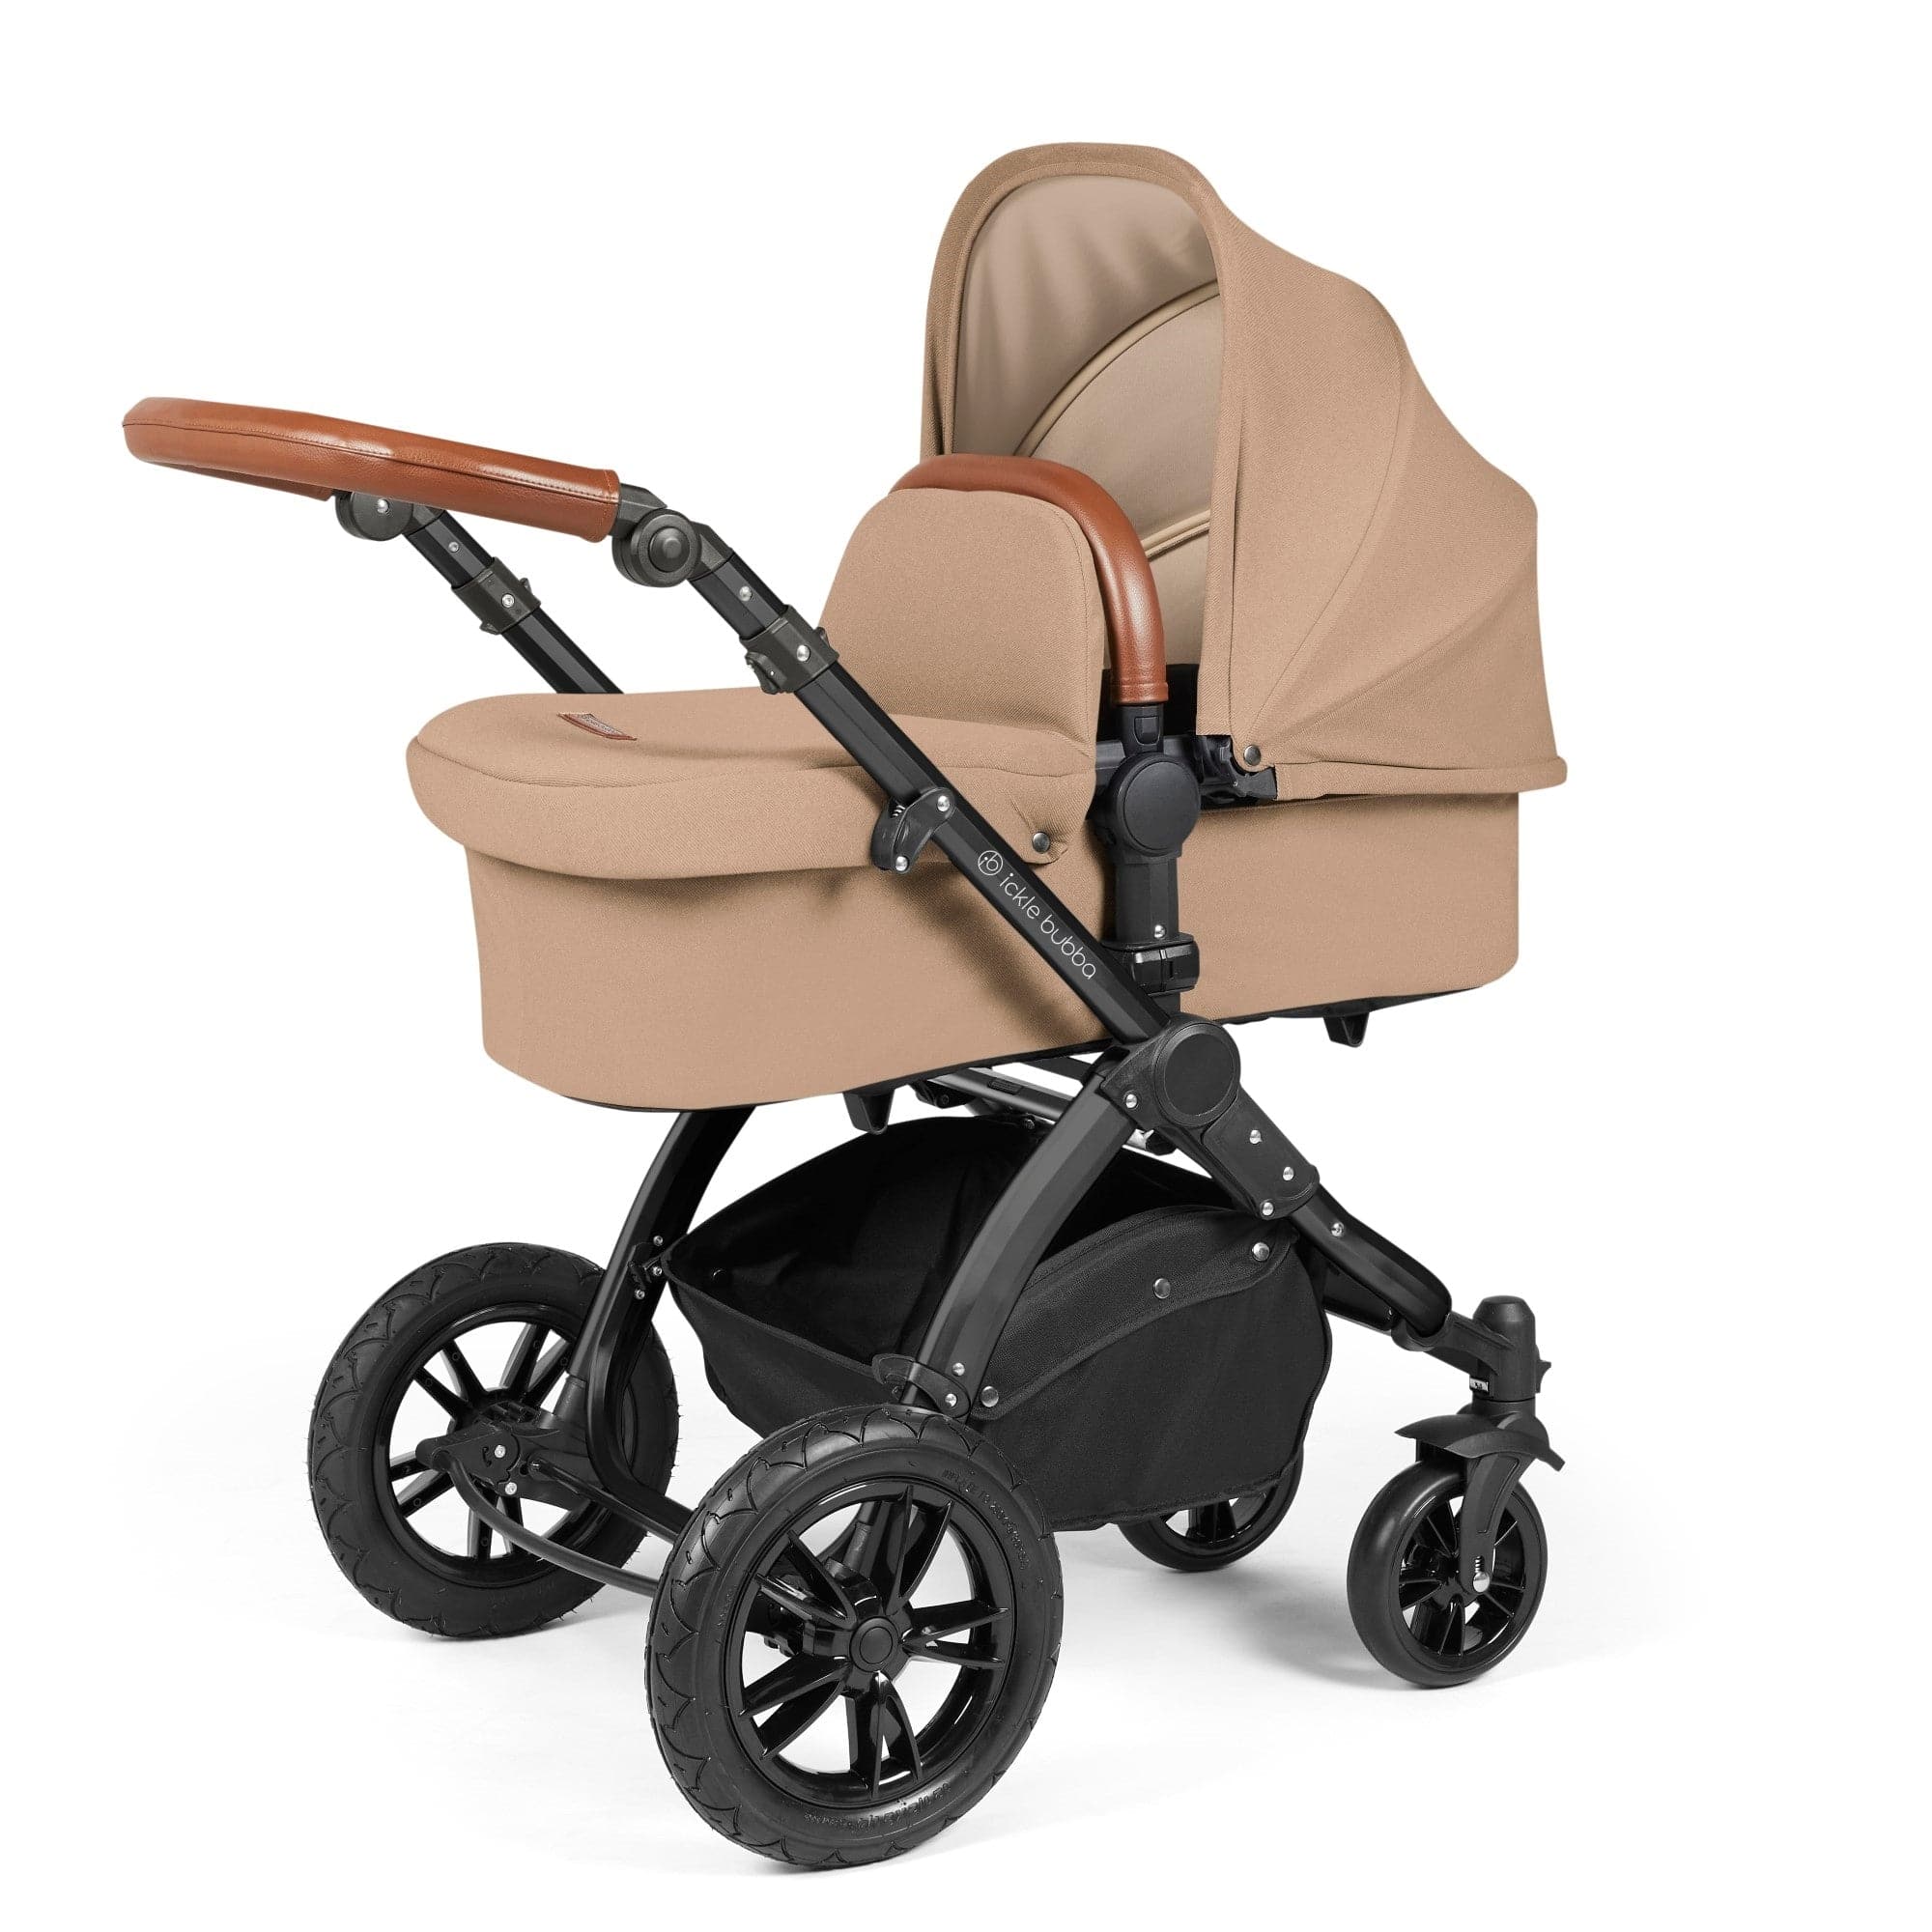 Ickle Bubba Stomp Luxe All-in-One I-Size Travel System With Isofix Base - Black / Desert / Tan - For Your Little One